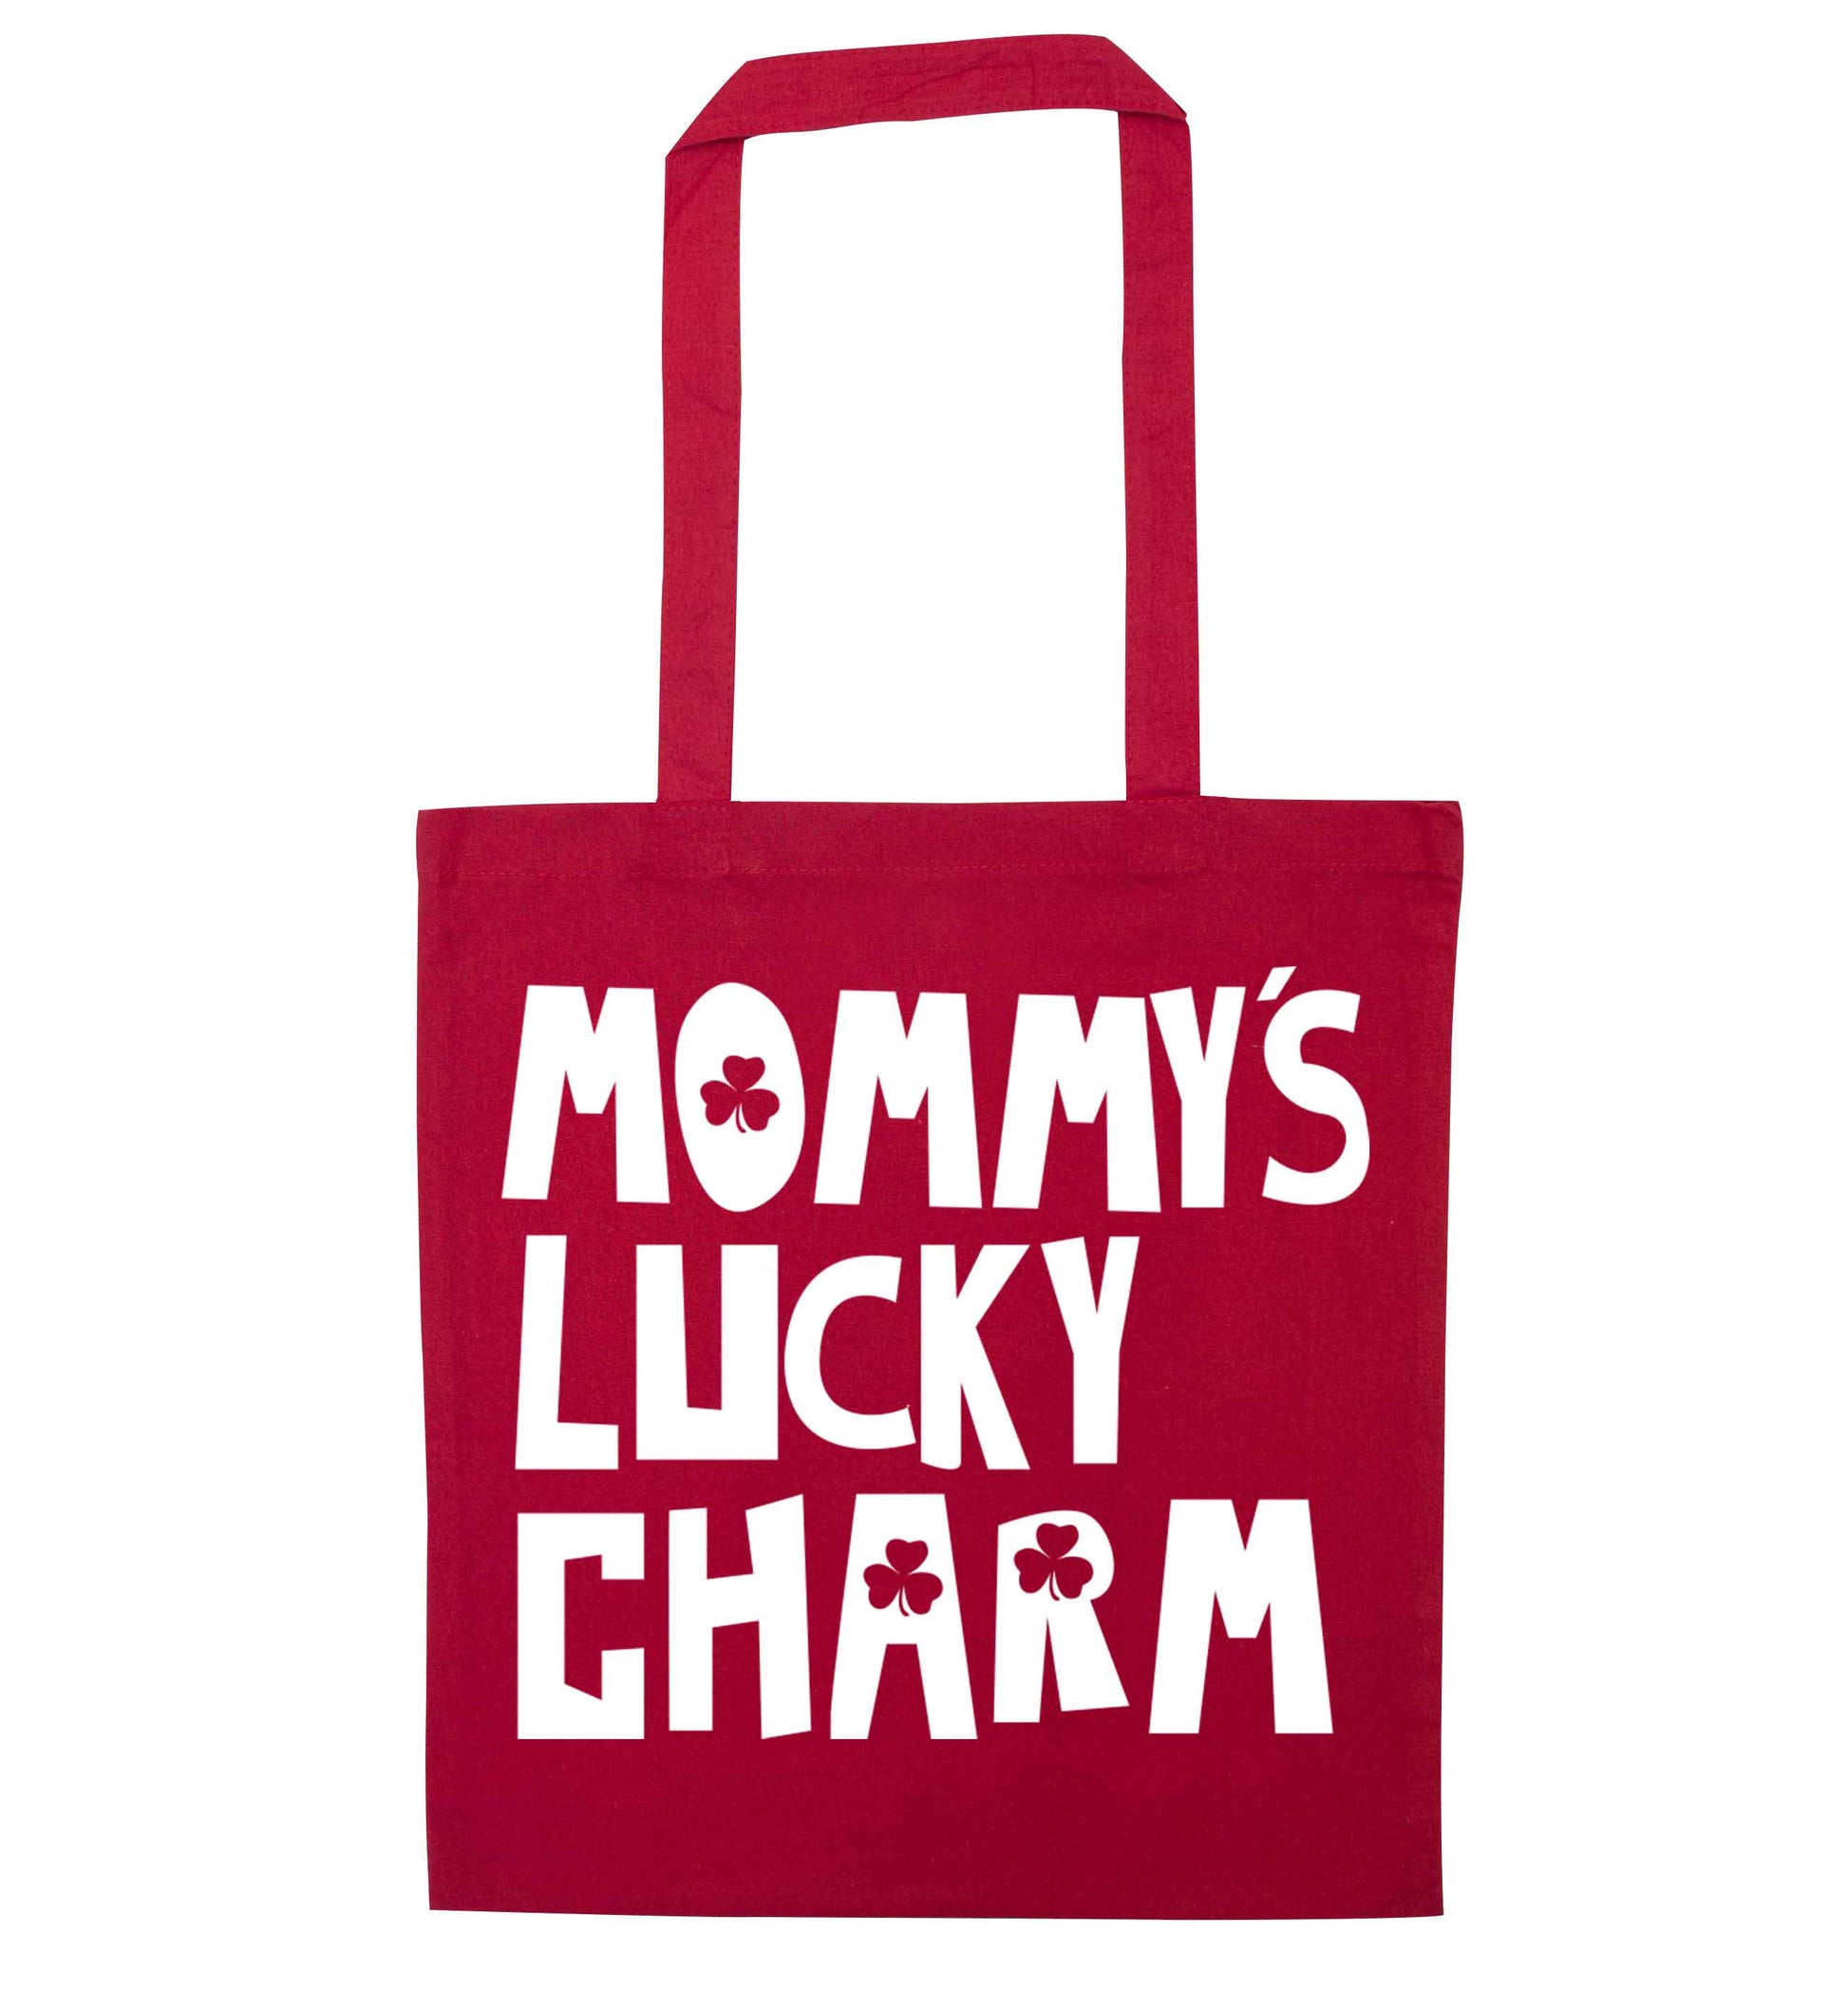 Mommy's lucky charm red tote bag